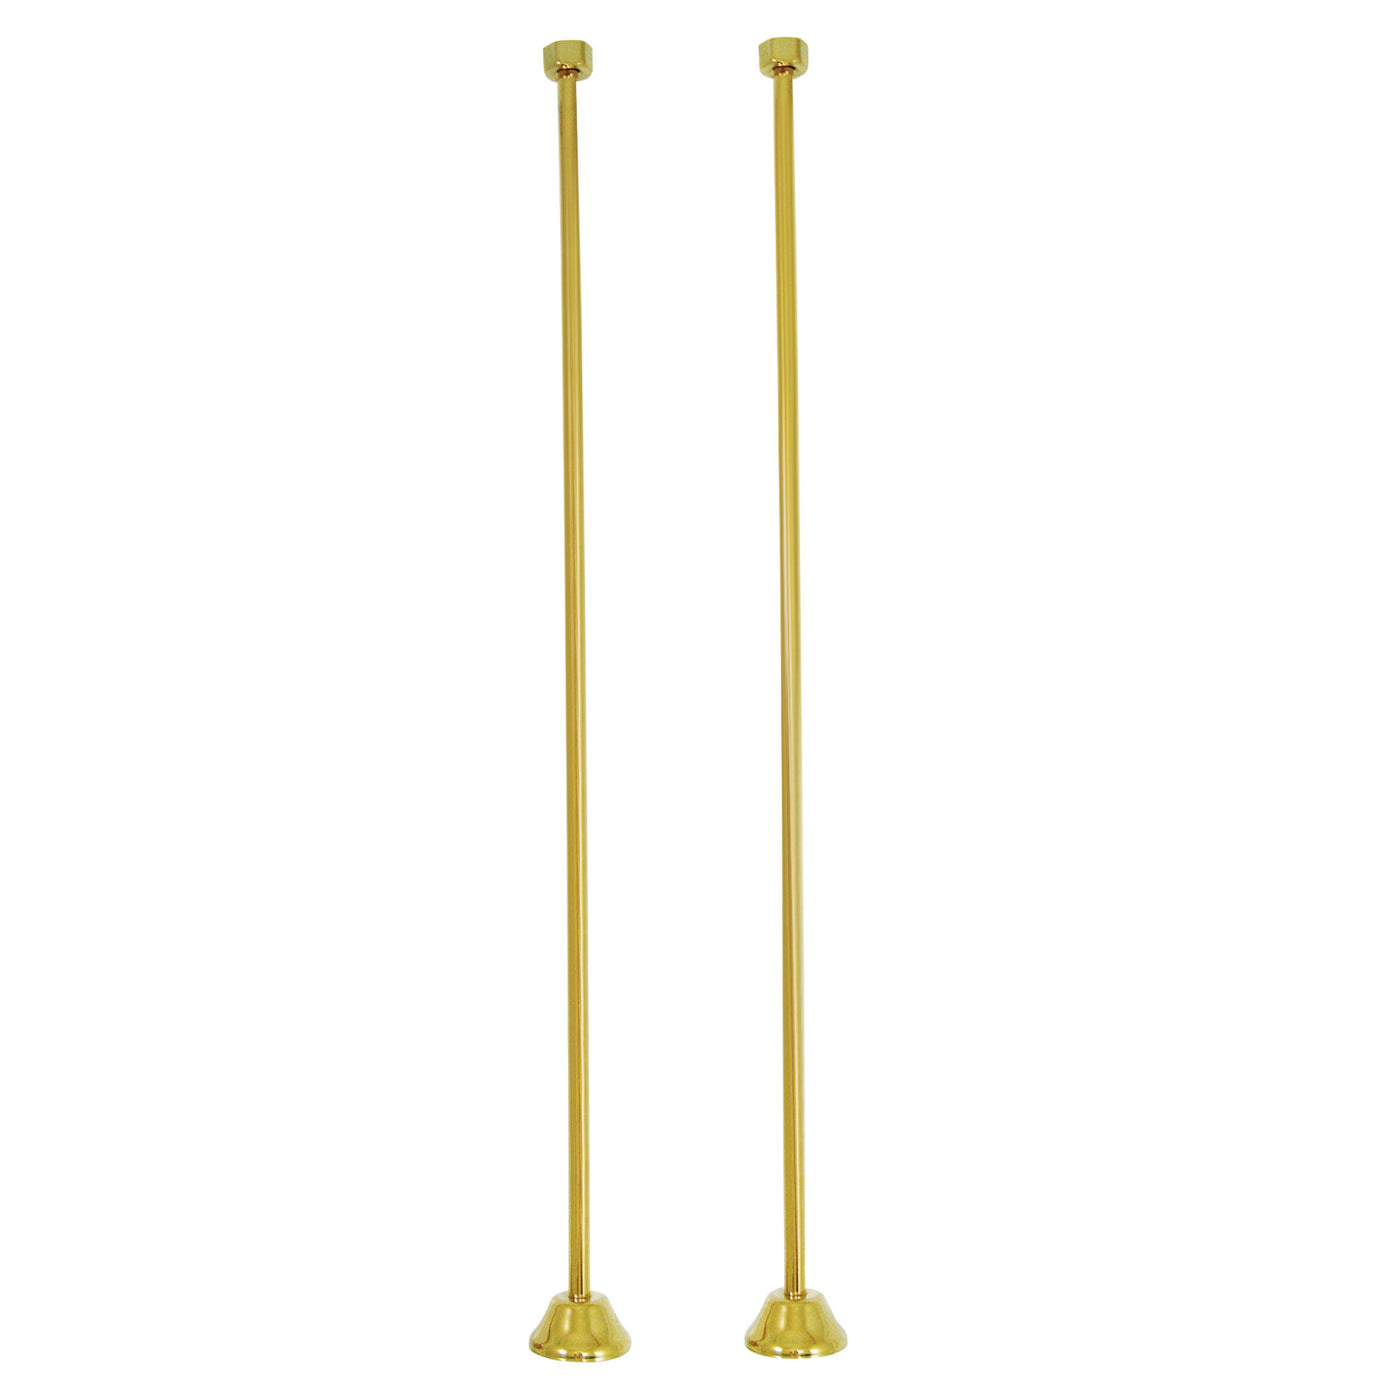 Elements of Design DS482 Straight Bath Supply, Polished Brass